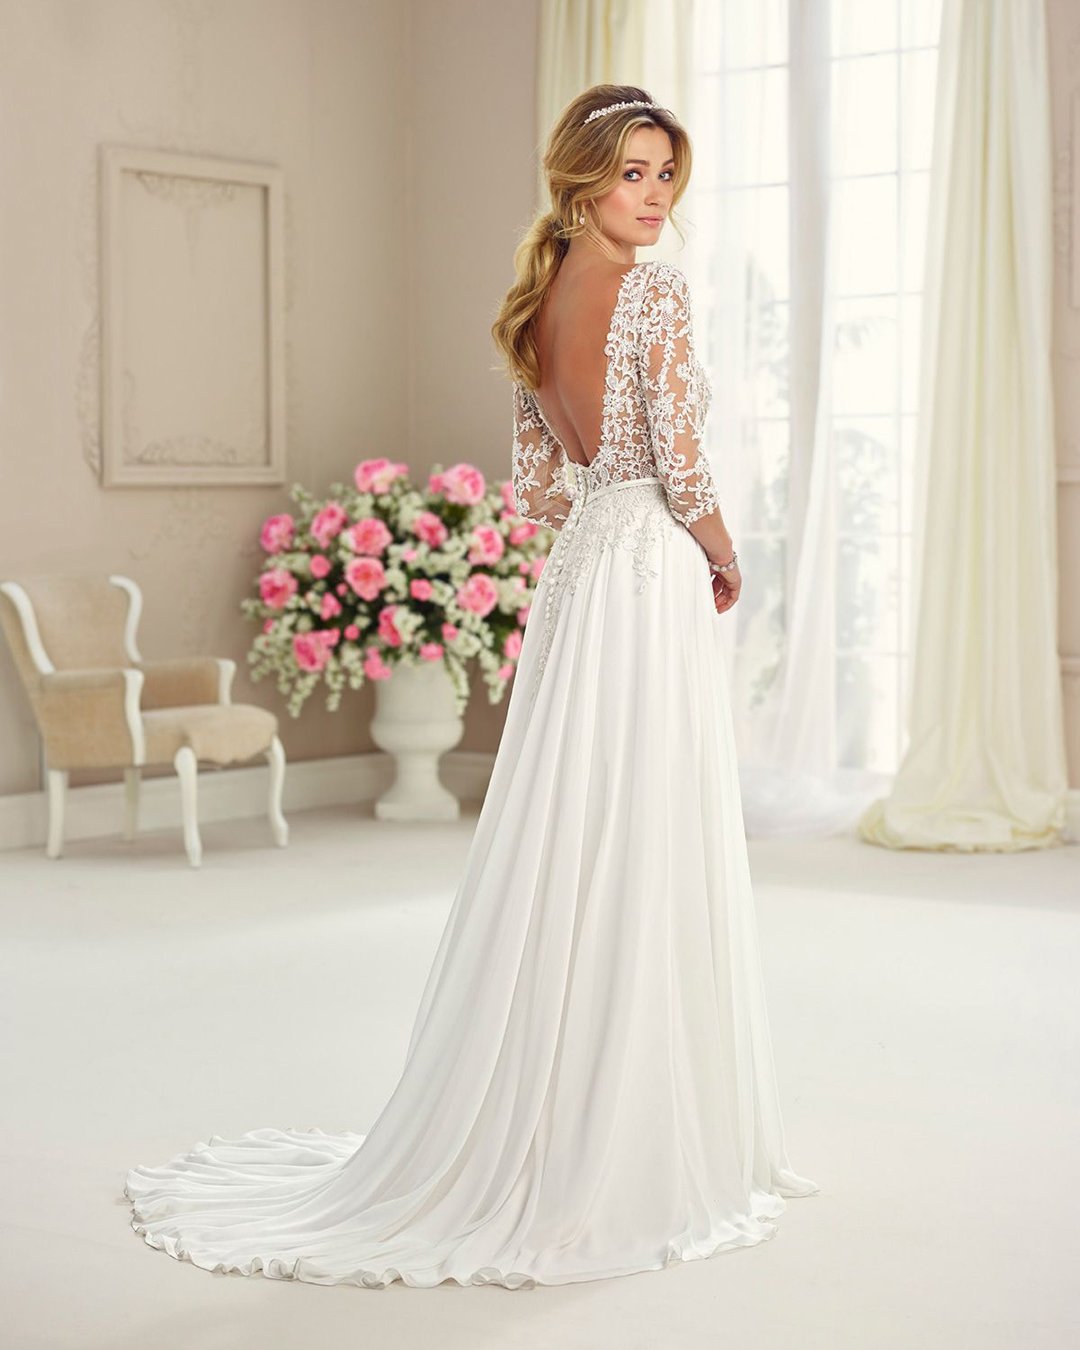 Wedding Dresses For Fall Best 10 wedding dresses for fall - Find the ...